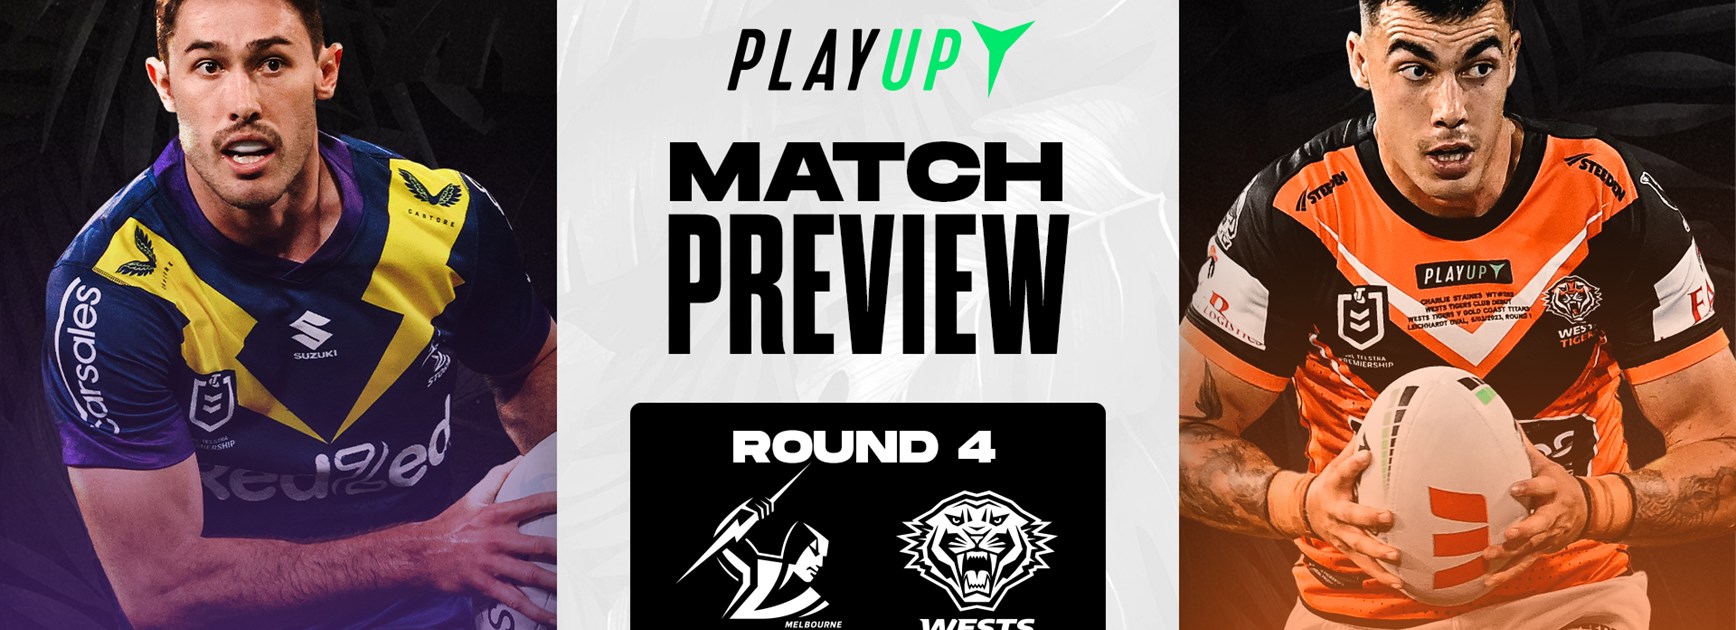 Match Preview: Round 4 vs Storm